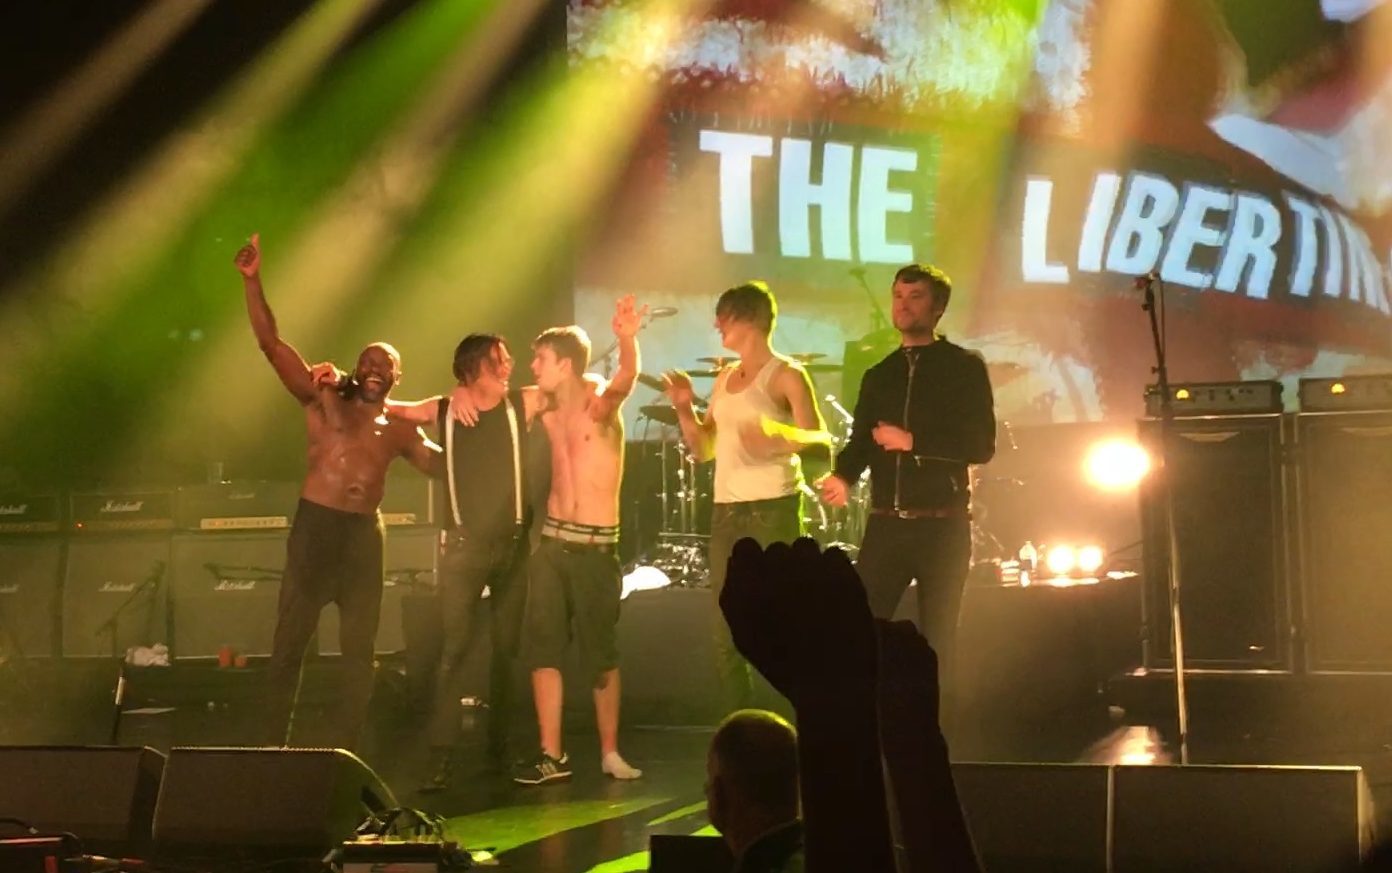 Libertines fan is welcomed on stage by the band in Dunfermline.